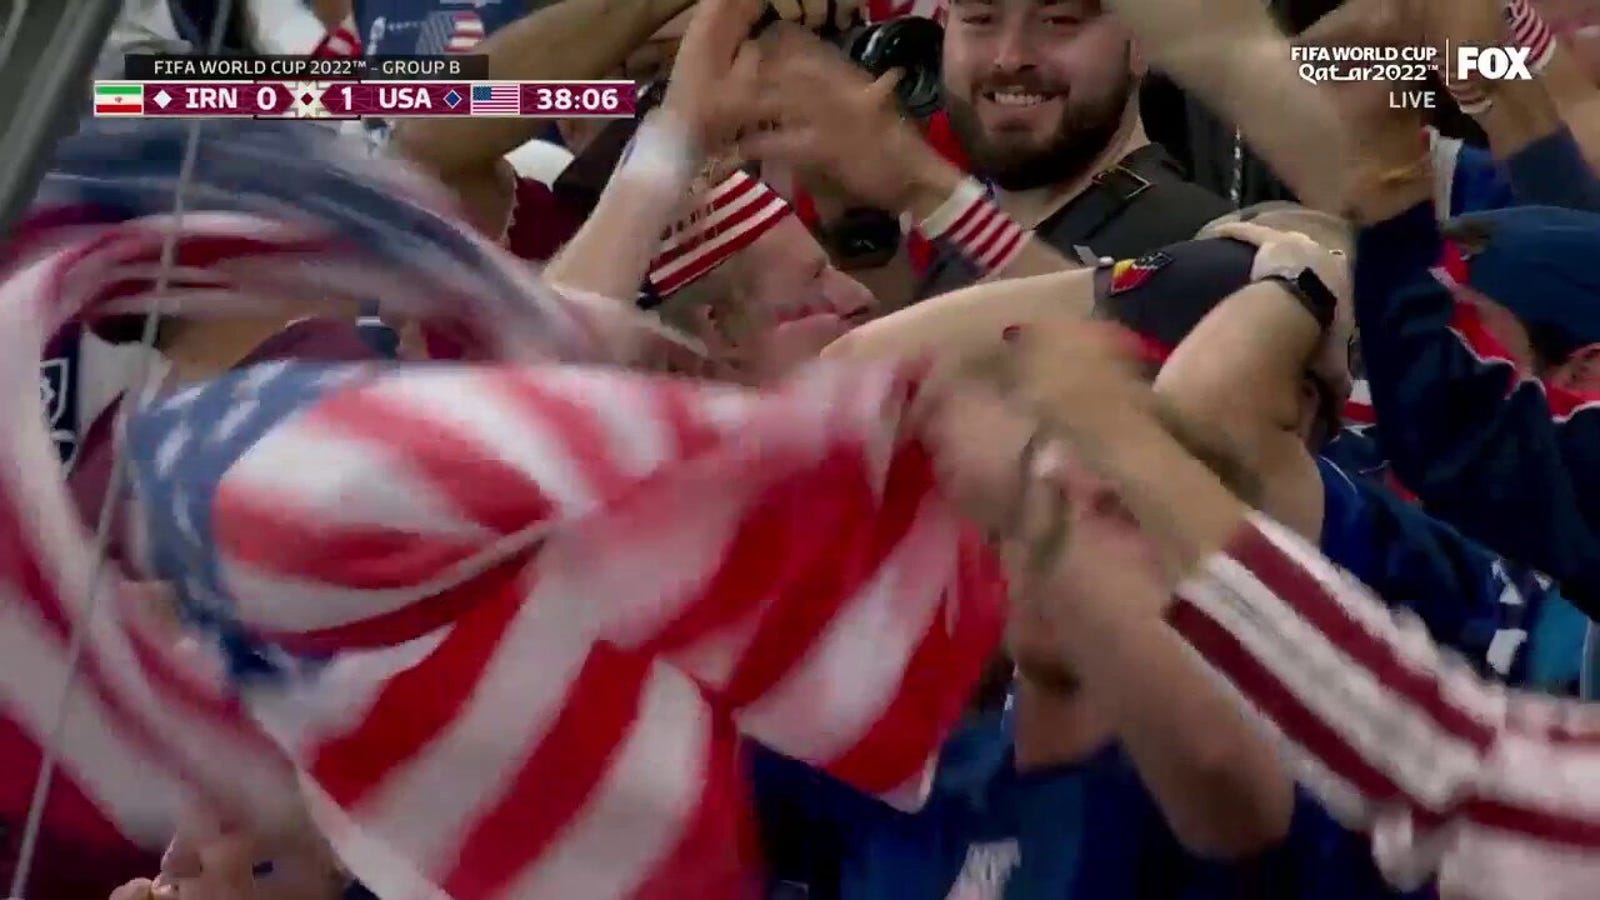 USA's Christian Pulisic scores goal vs. Iran in 38' | 2022 FIFA World Cup